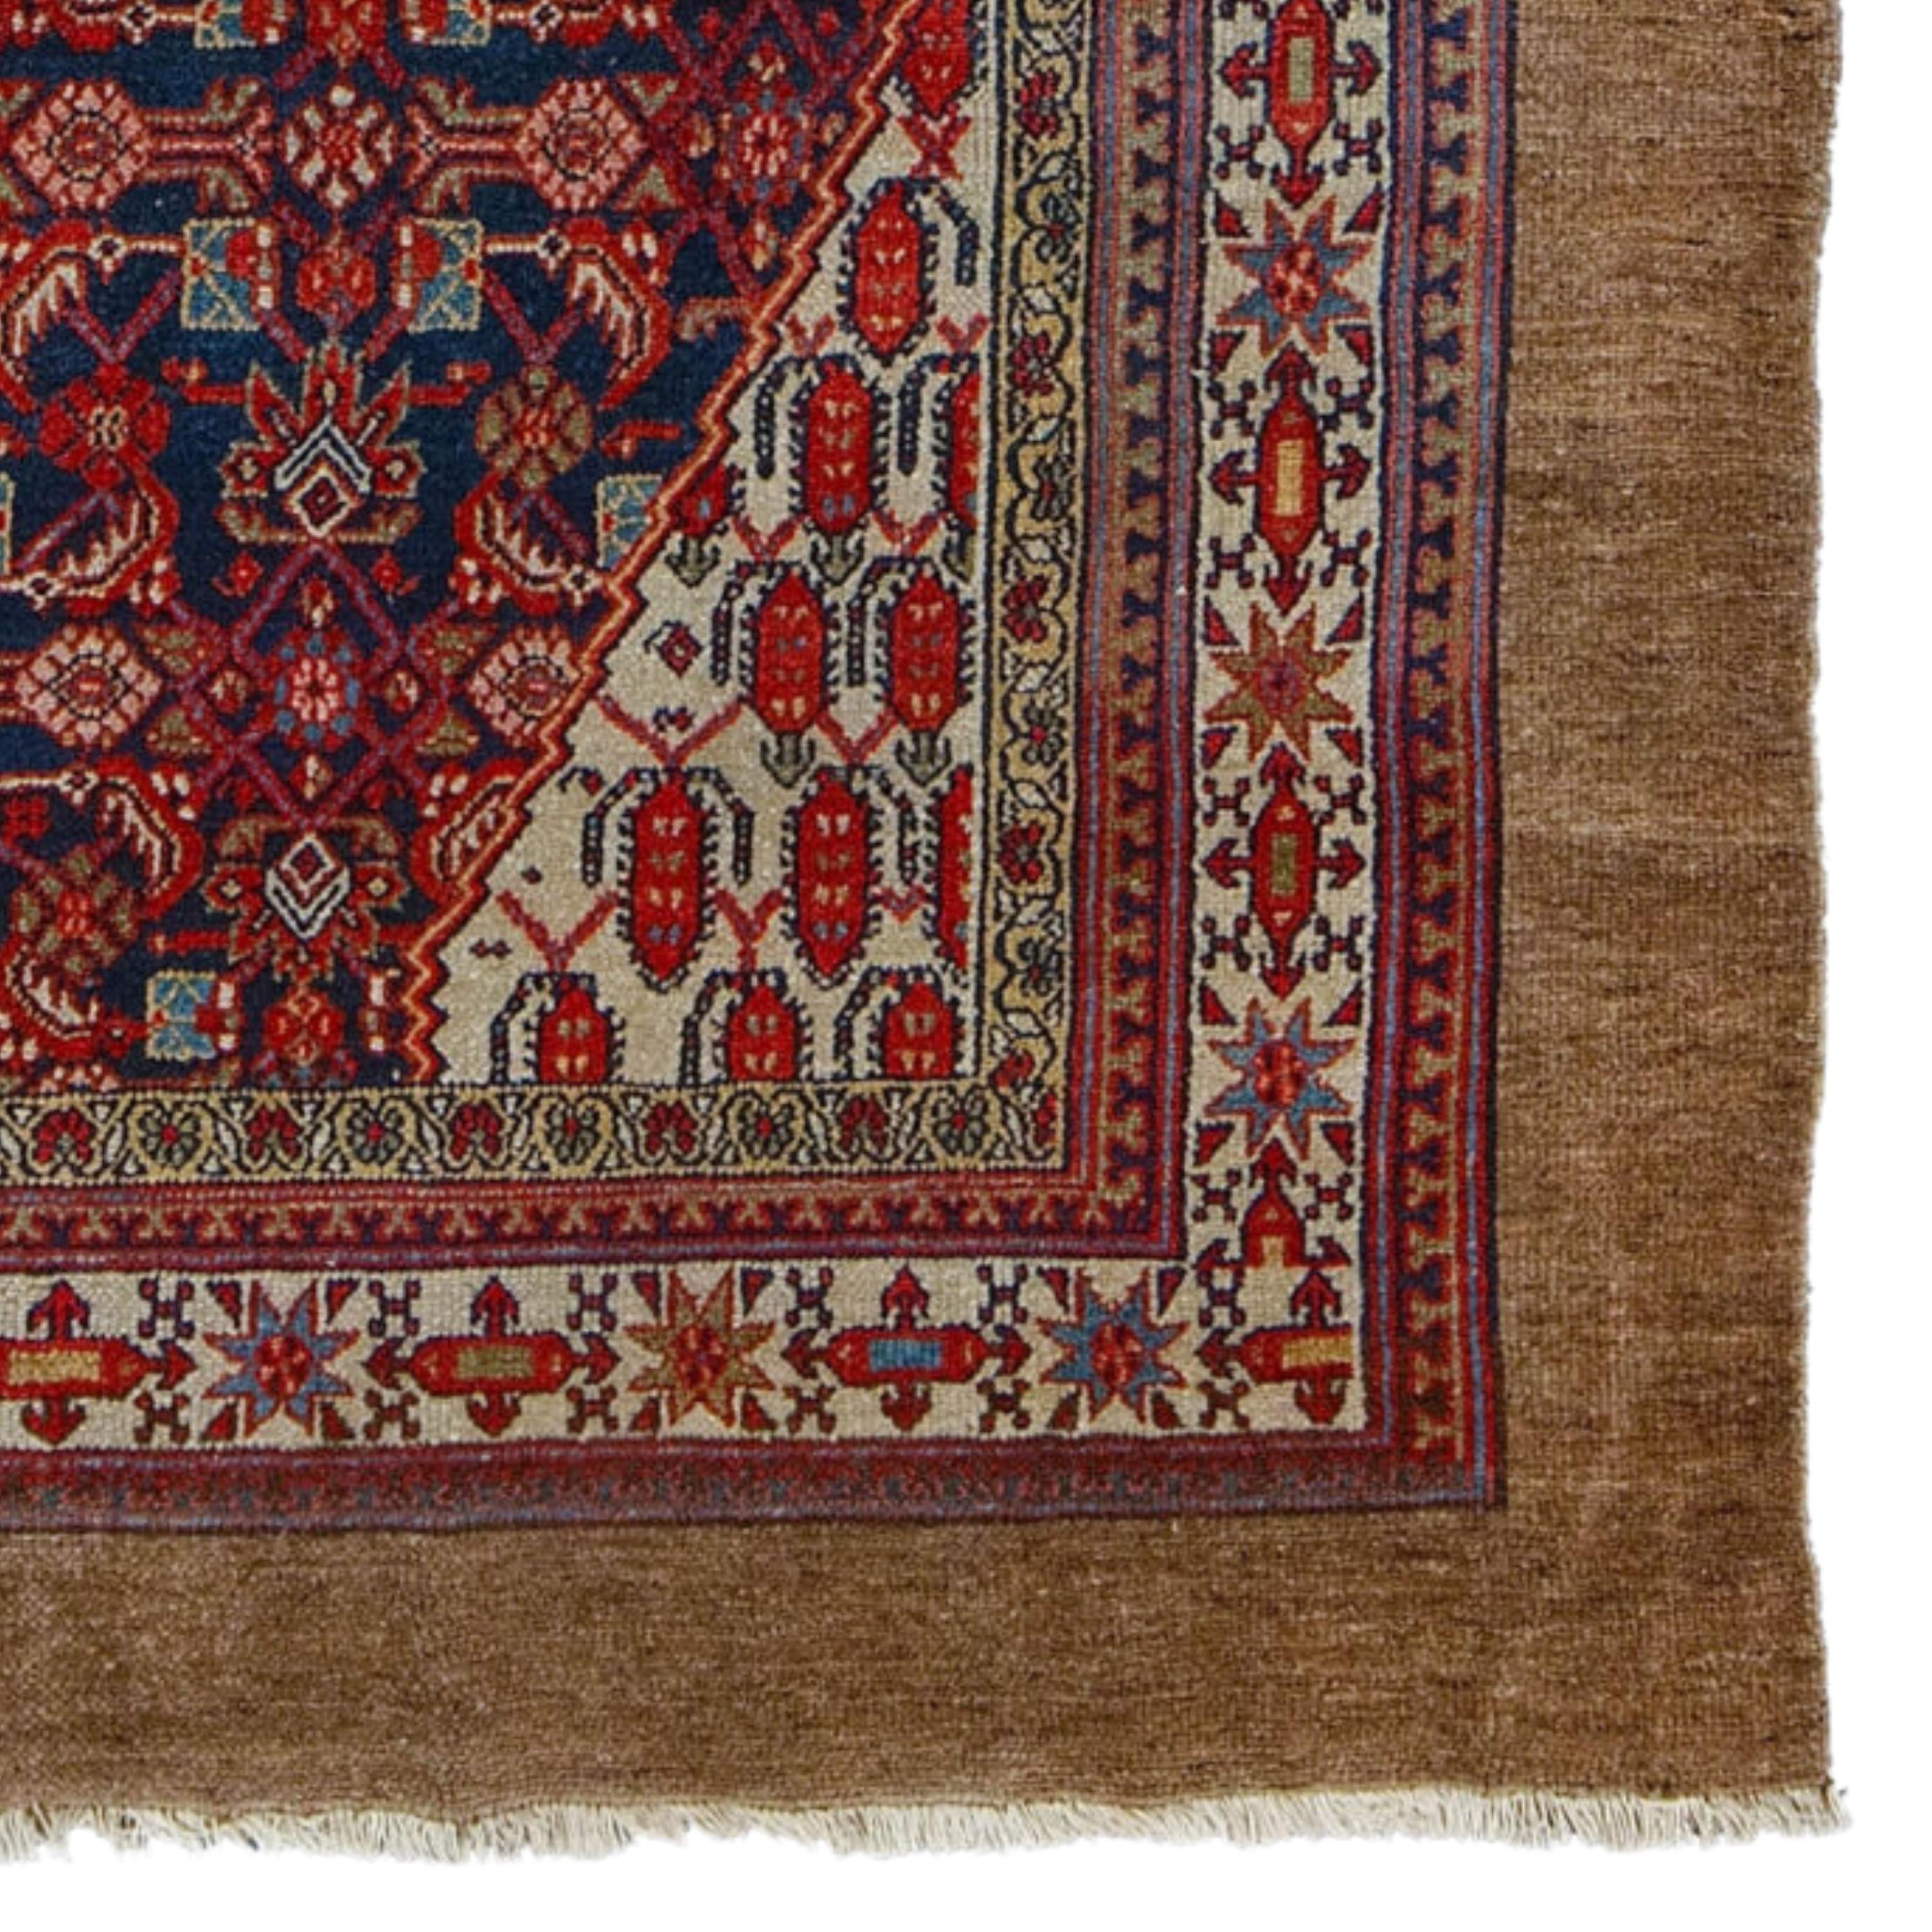 Wool Antique Hamadan Rug - Late of 19th Century in Good Condition, Antique Rug For Sale